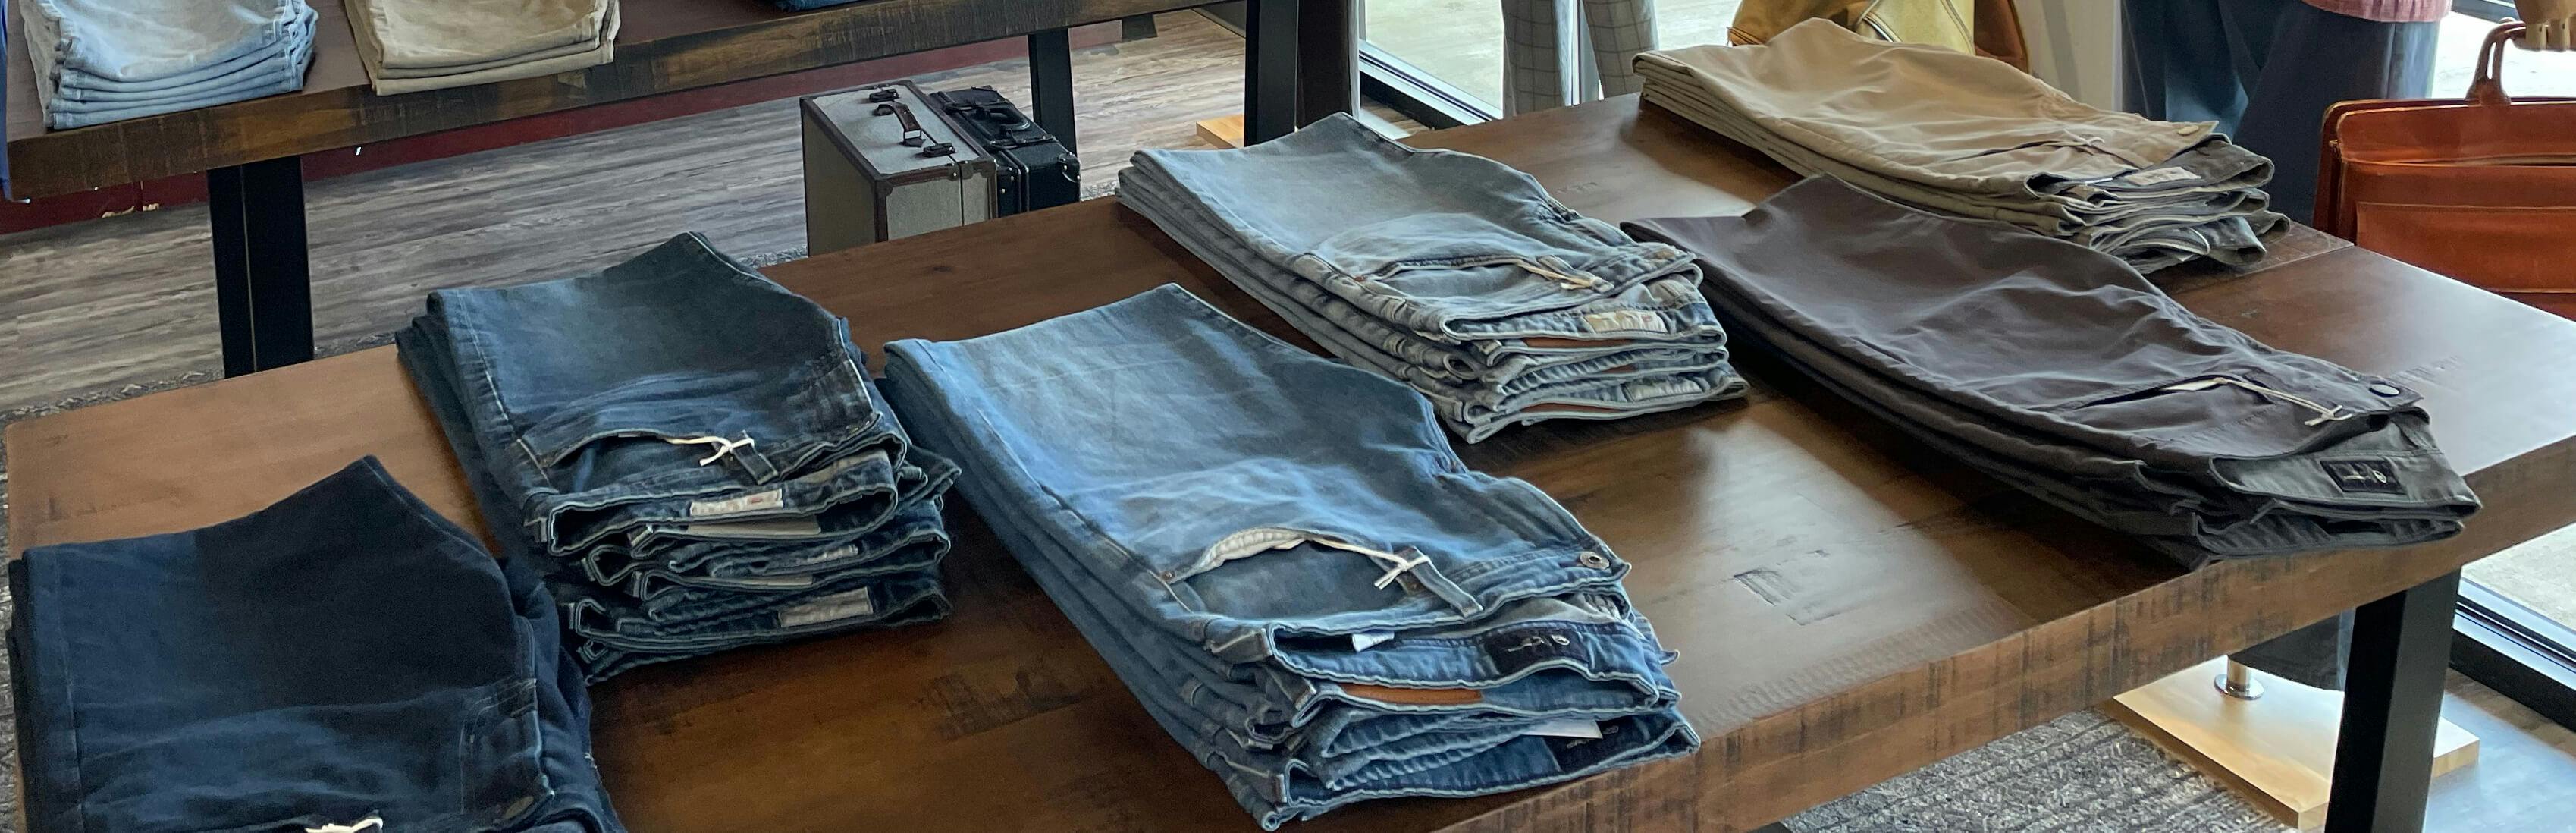 Image of a stylish and diverse collection of jeans showcased in JwR's store.